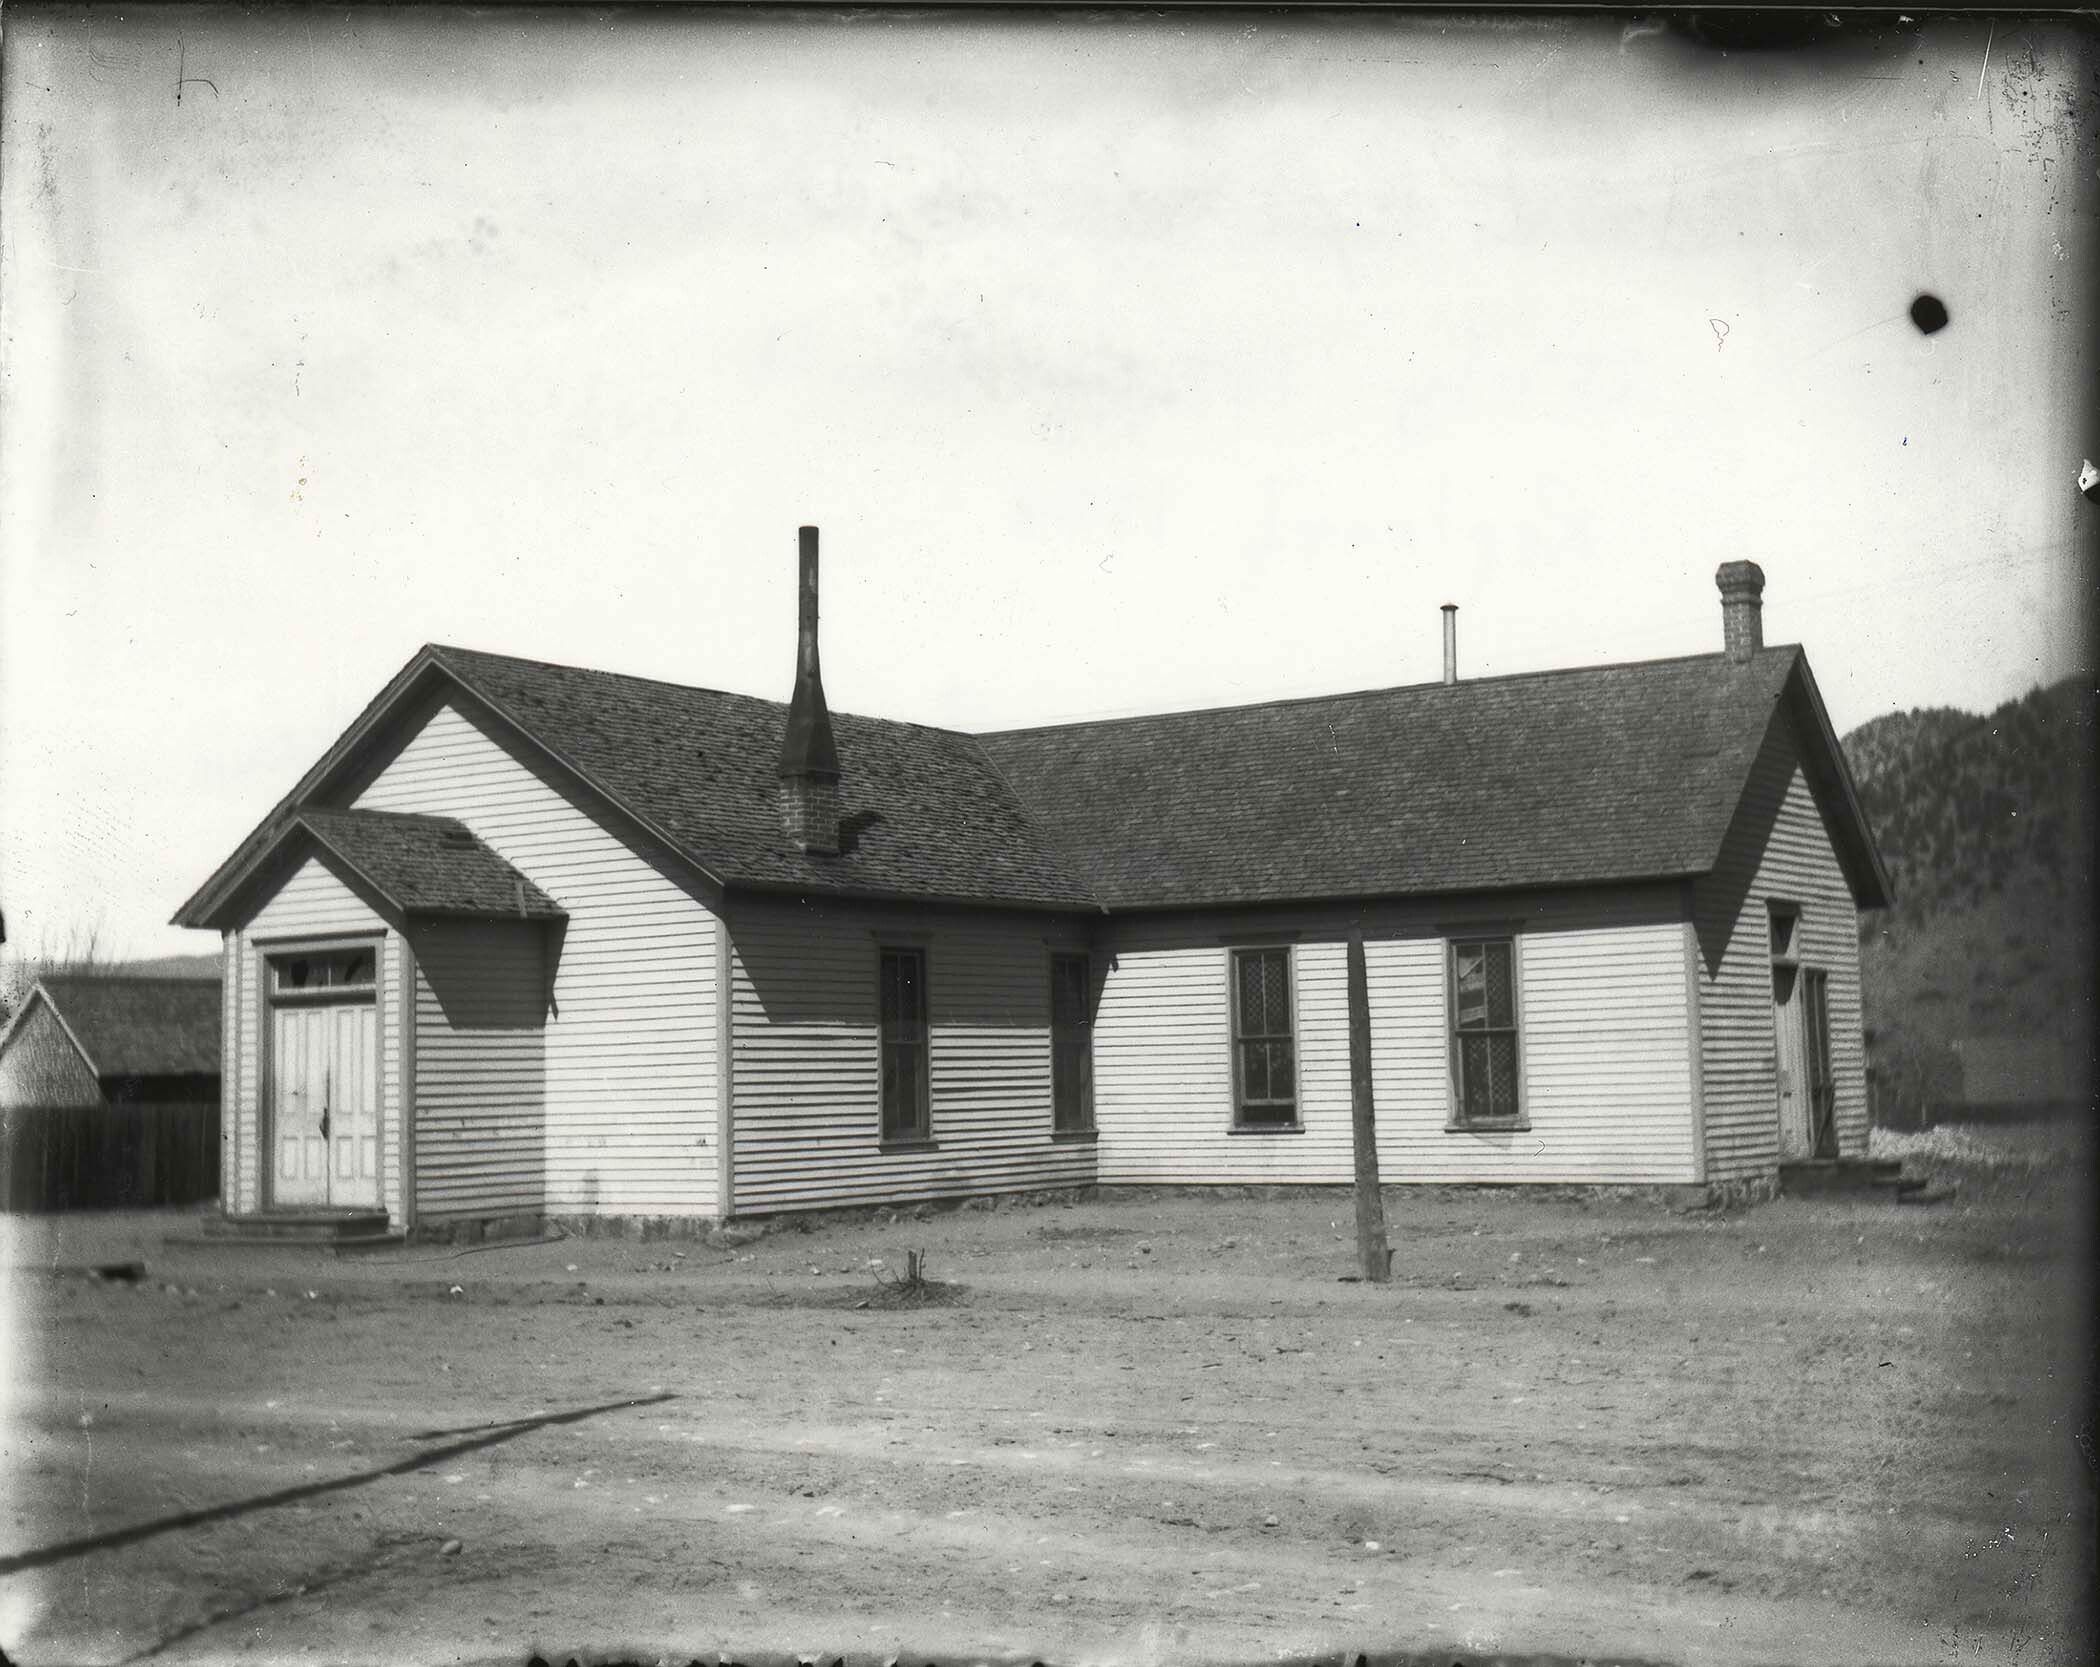 The building above is believed to be one of the first churches in Salida. It was built during July of 1883, at the corner of 4th and D Streets, and was called the Salida Methodist-Episcopal Church. In 1888 it was replaced by another building.  (2)